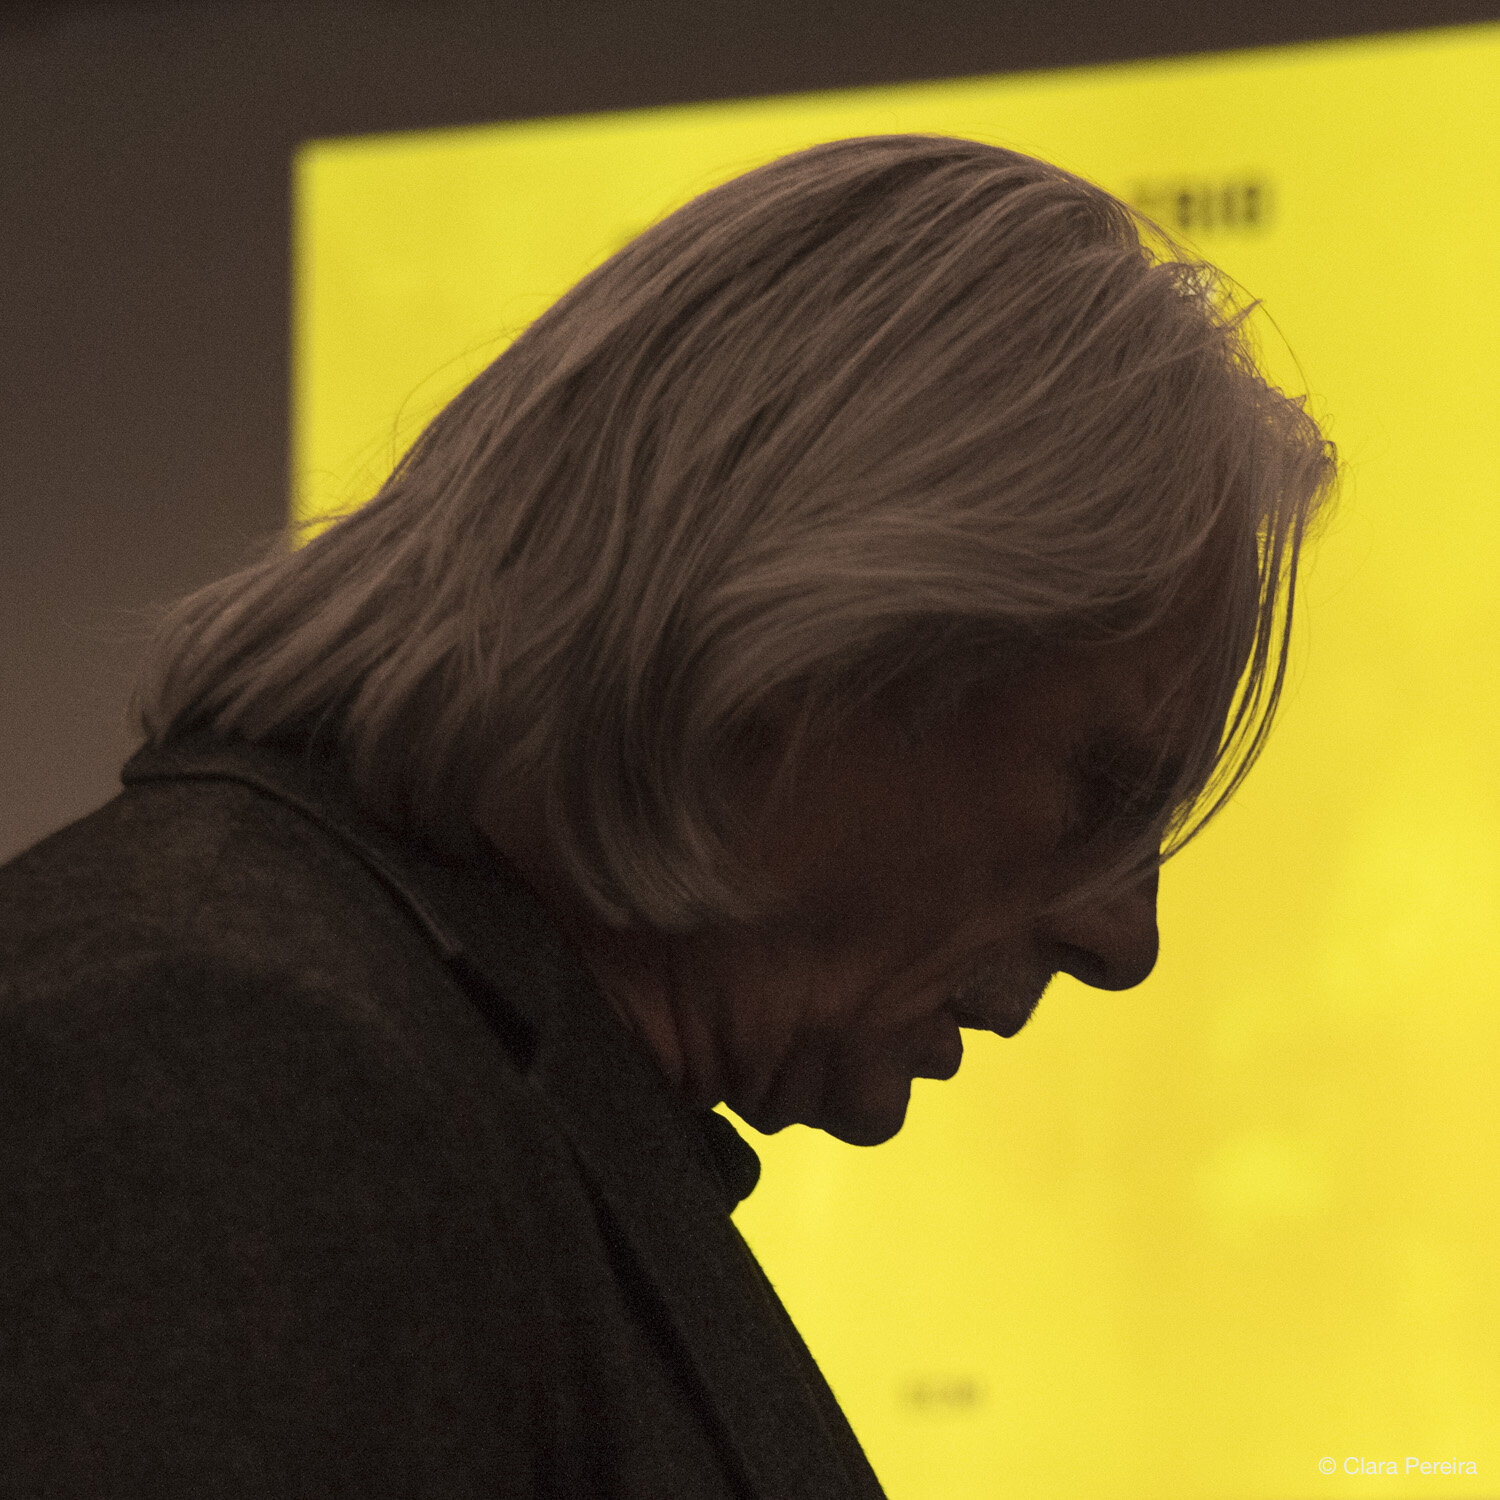 Manfred Eicher at the Winter Jazz Festival 2016, NYC